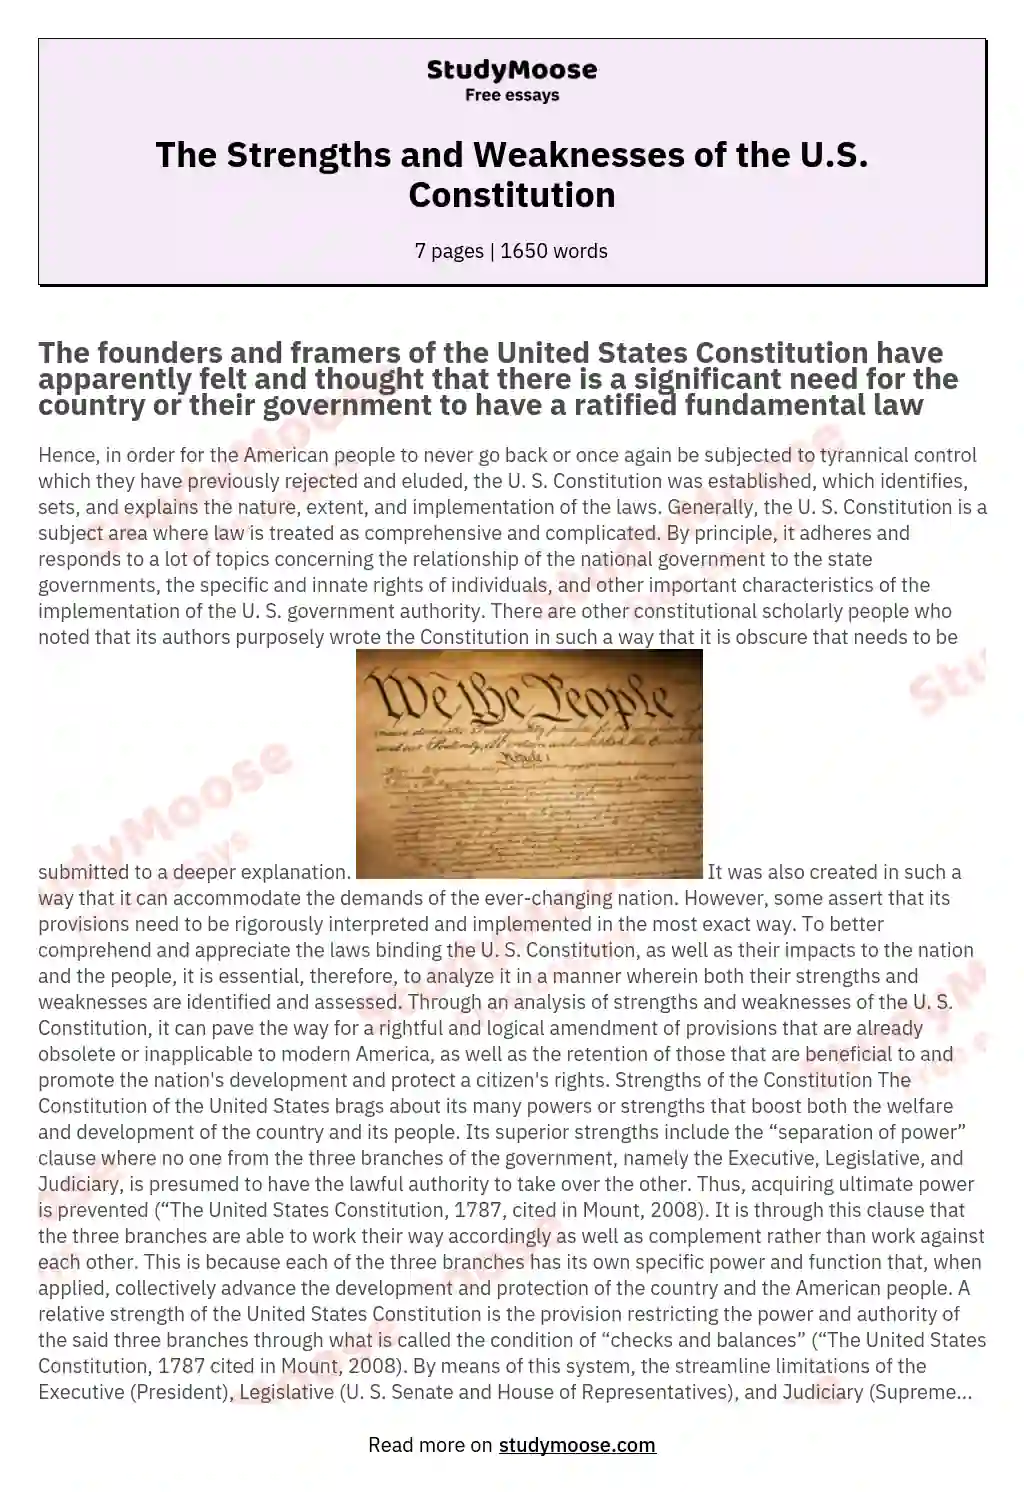 The Strengths and Weaknesses of the U.S. Constitution essay